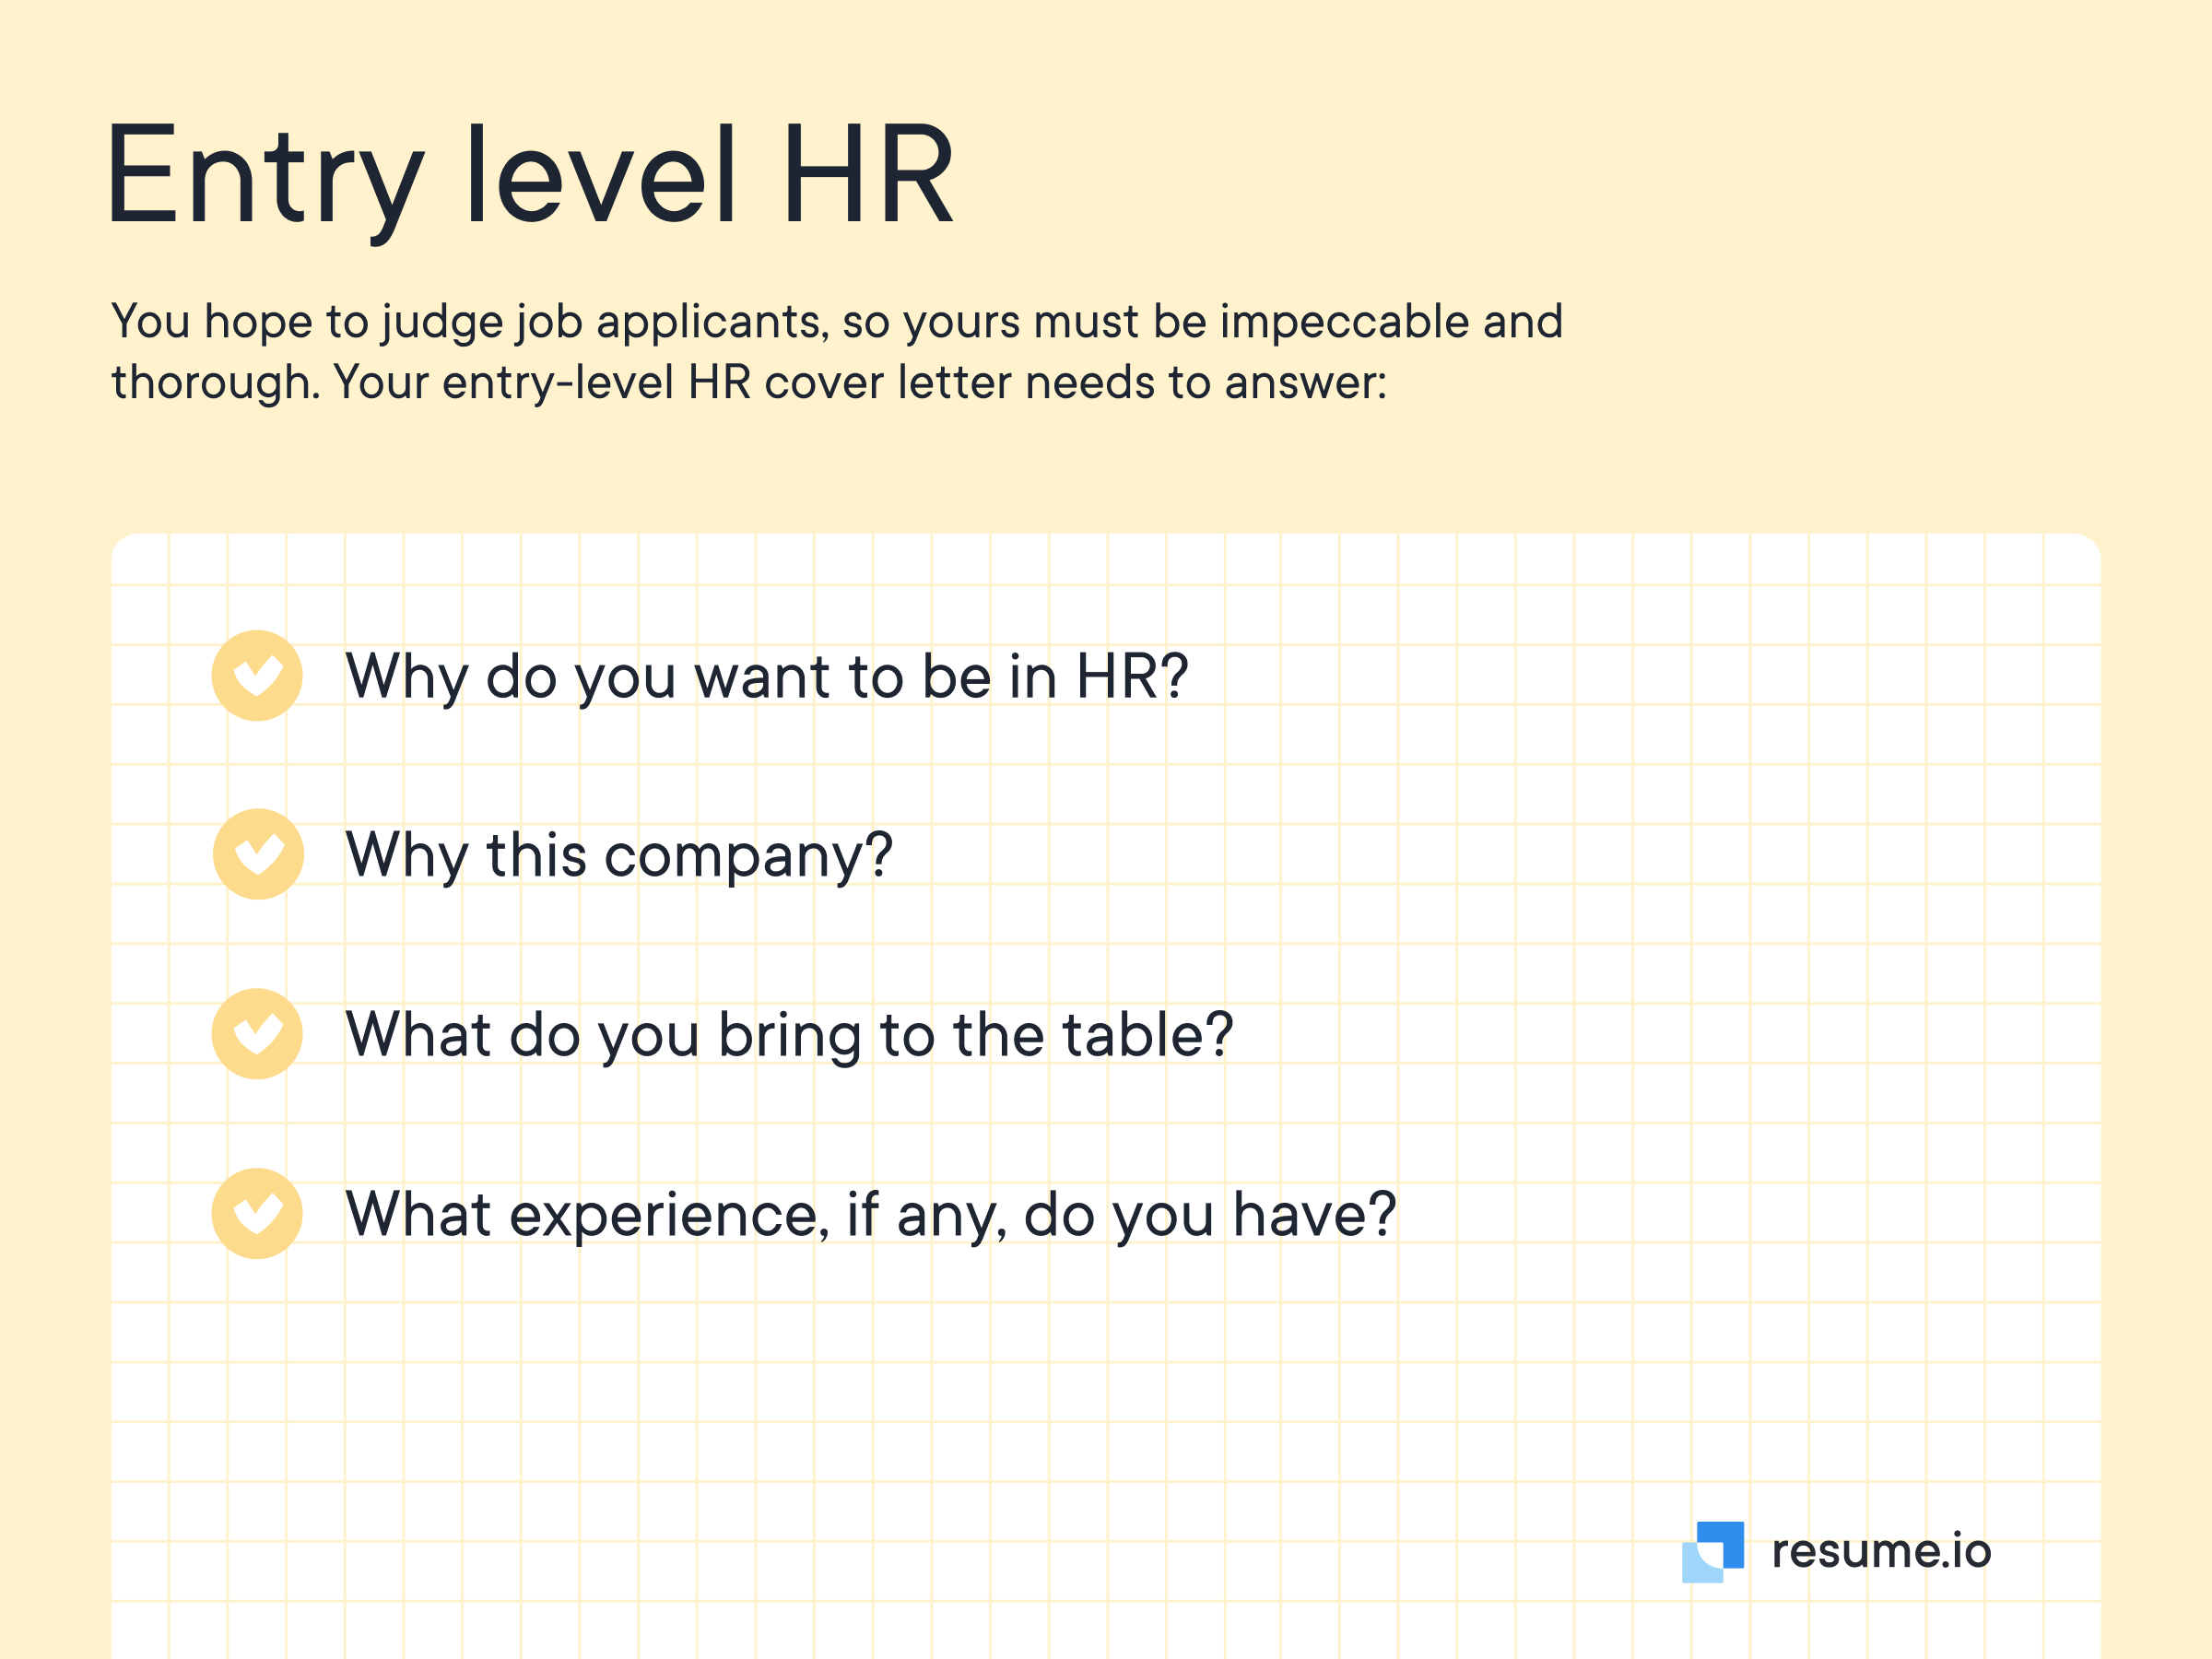 As an Entry-Level HR you hope to judge job applicants, so yours must be impeccable and thorough.